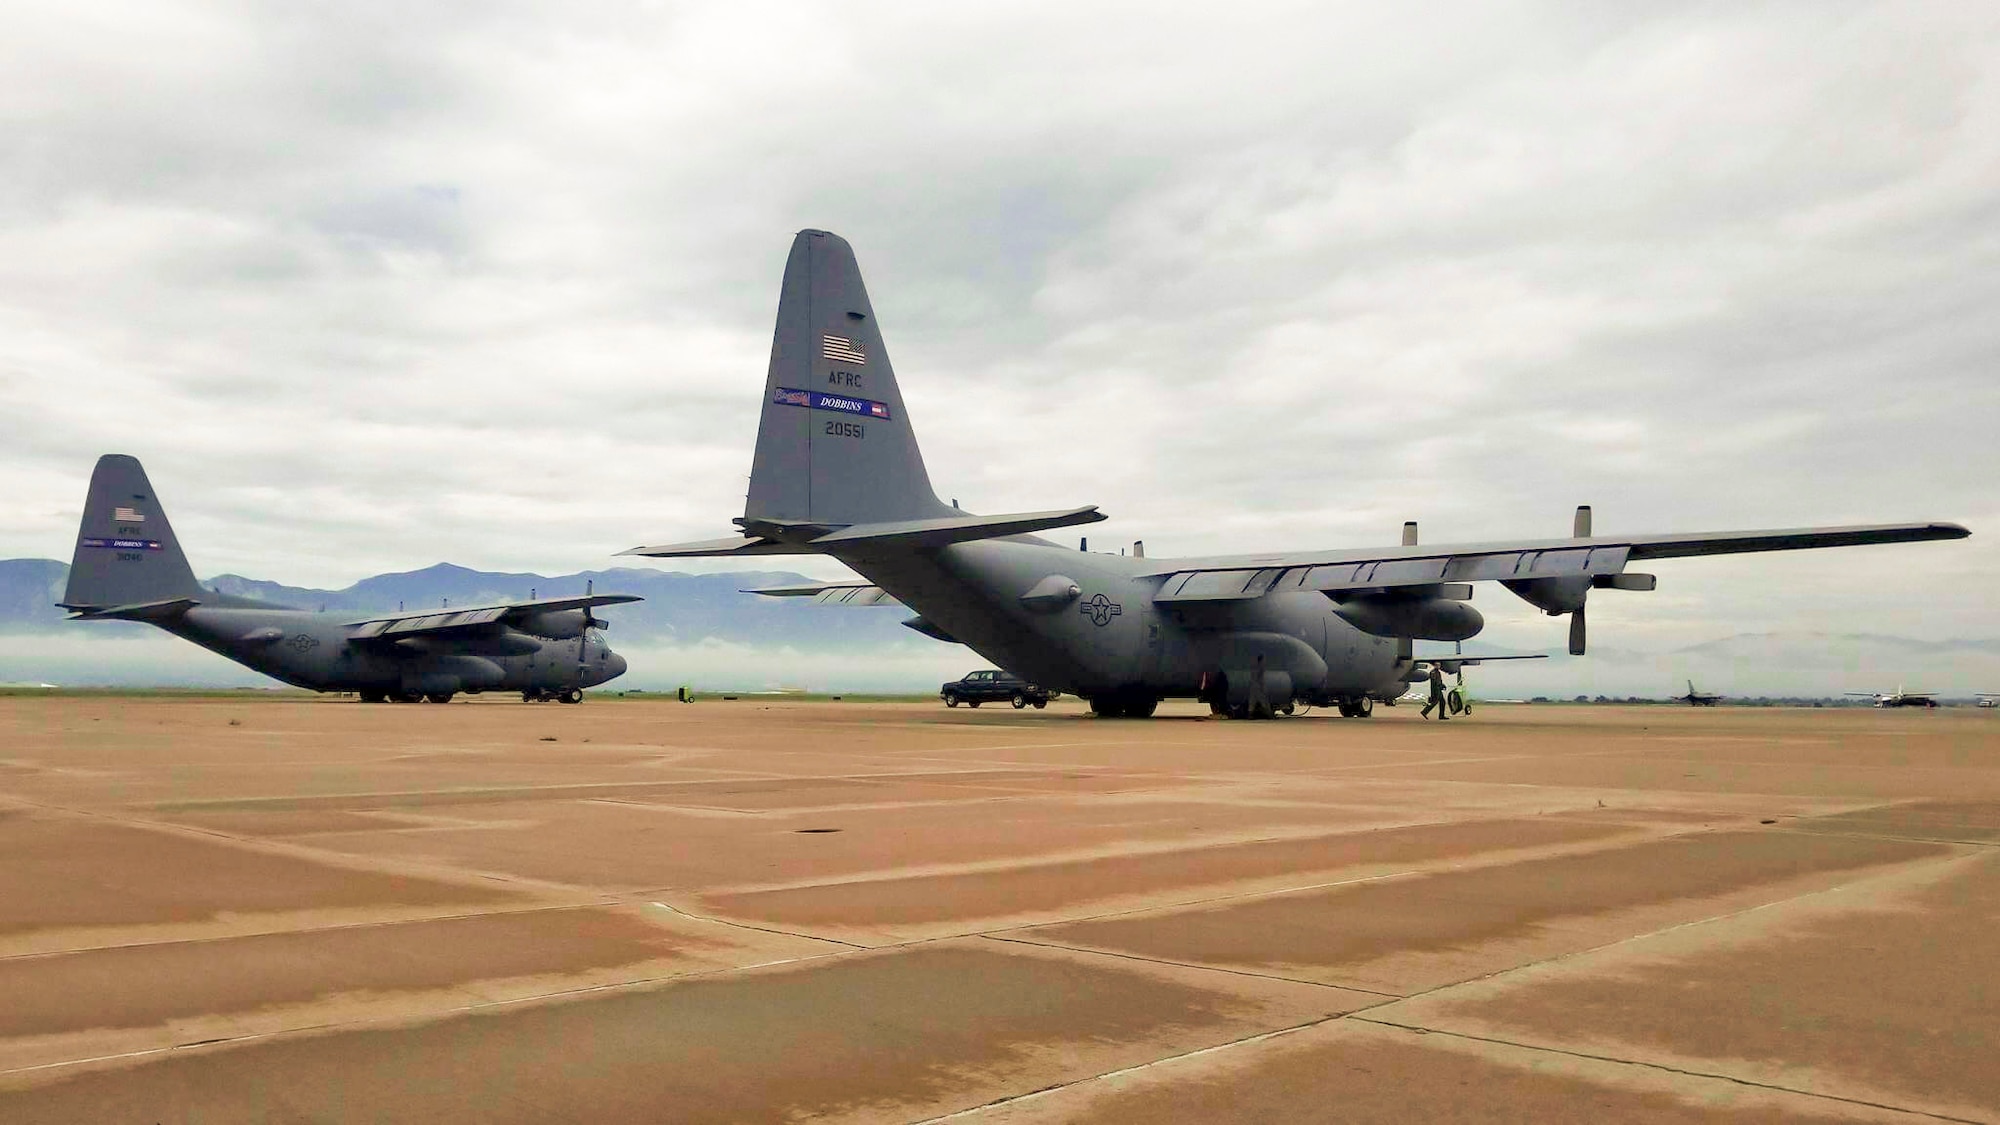 Two C-130H Hercules from the 94th Airlift Wing, Dobbins Air Reserve Base, Ga. are parked on the flightline at Peterson Air Force Base, Colo. Aug. 3, 2017. The two aircraft participated with other C-130s in high-altitude airdrops in the Colorado Rockies. (U.S. Air Force photo/Senior Airman Lauren Douglas)